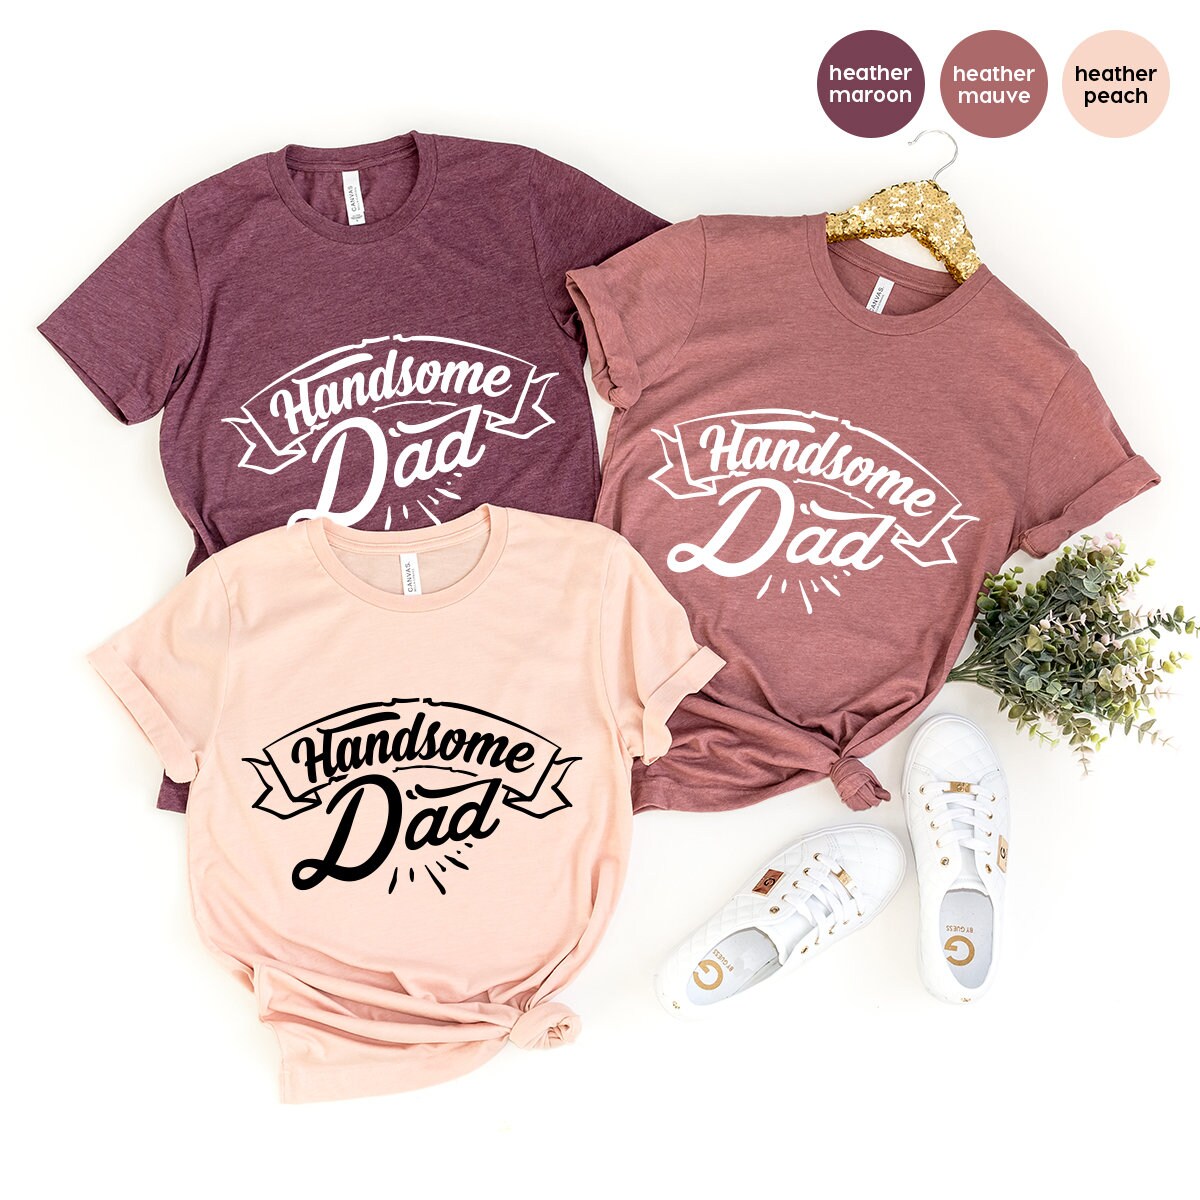 Handsome Dad Shirt, Daddy T Shirt, Dad Birthday Gift, Best Dad Shirt, Gift For New Dad, Funny Dad Shirt, Fatherhood Shirt, Dad Gift - Fastdeliverytees.com